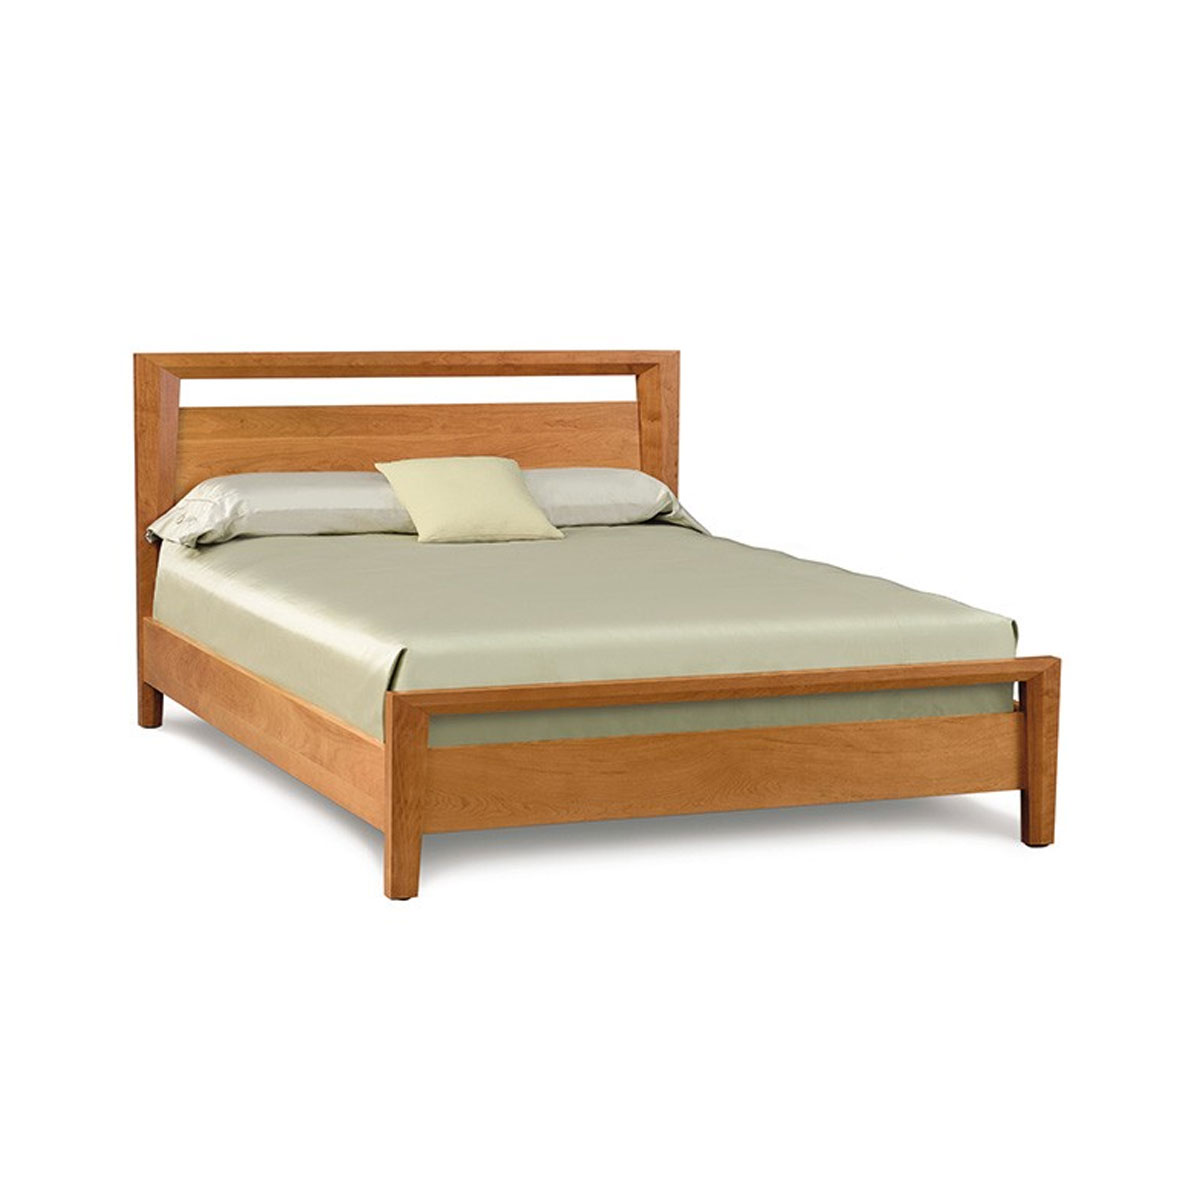 Copeland Mansfield Bed in Cherry